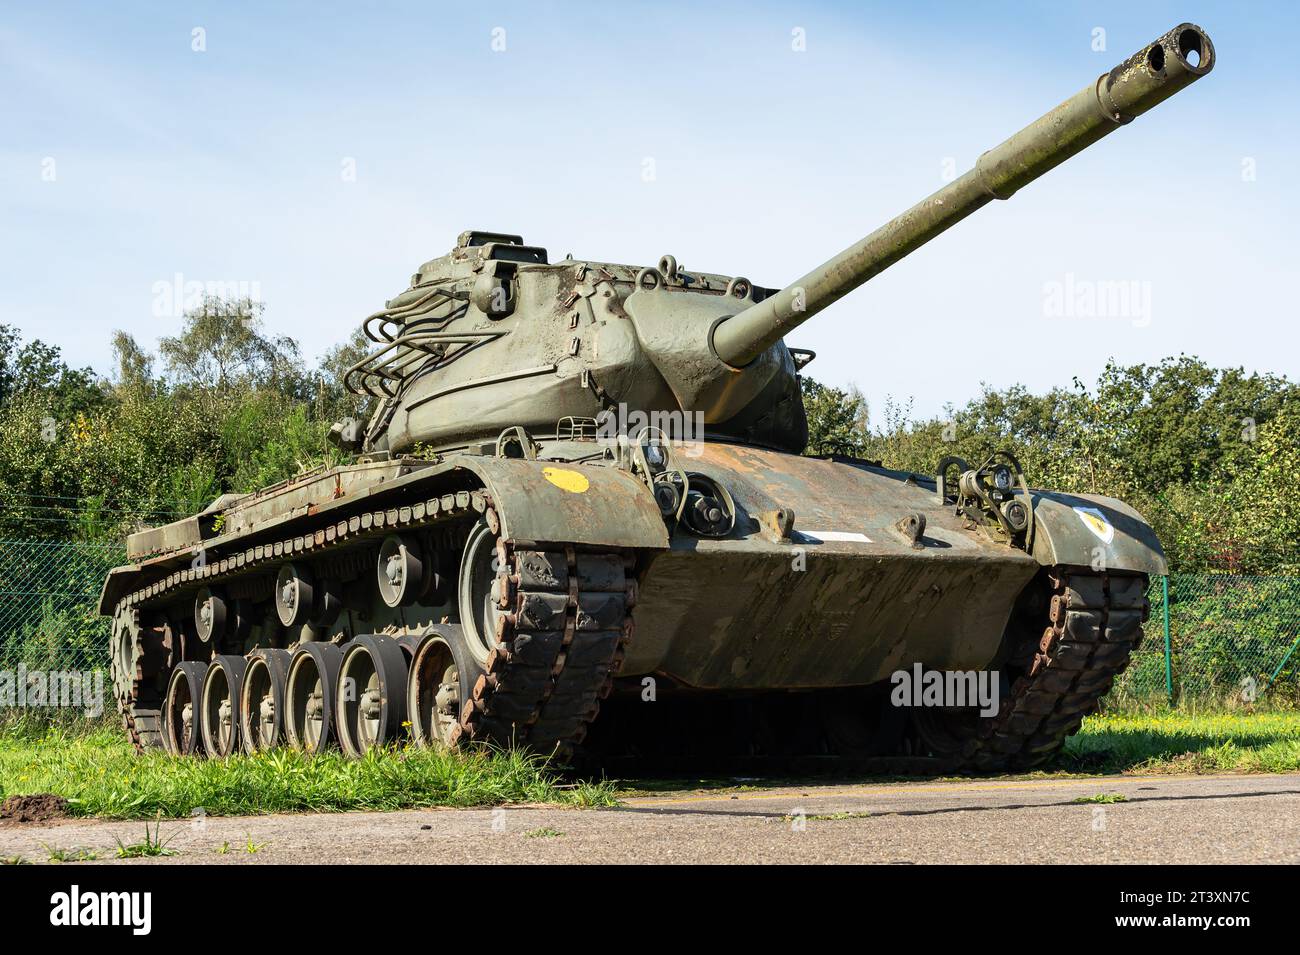 The M46 Patton medium tank equipped with a 90 mm gun. Stock Photo